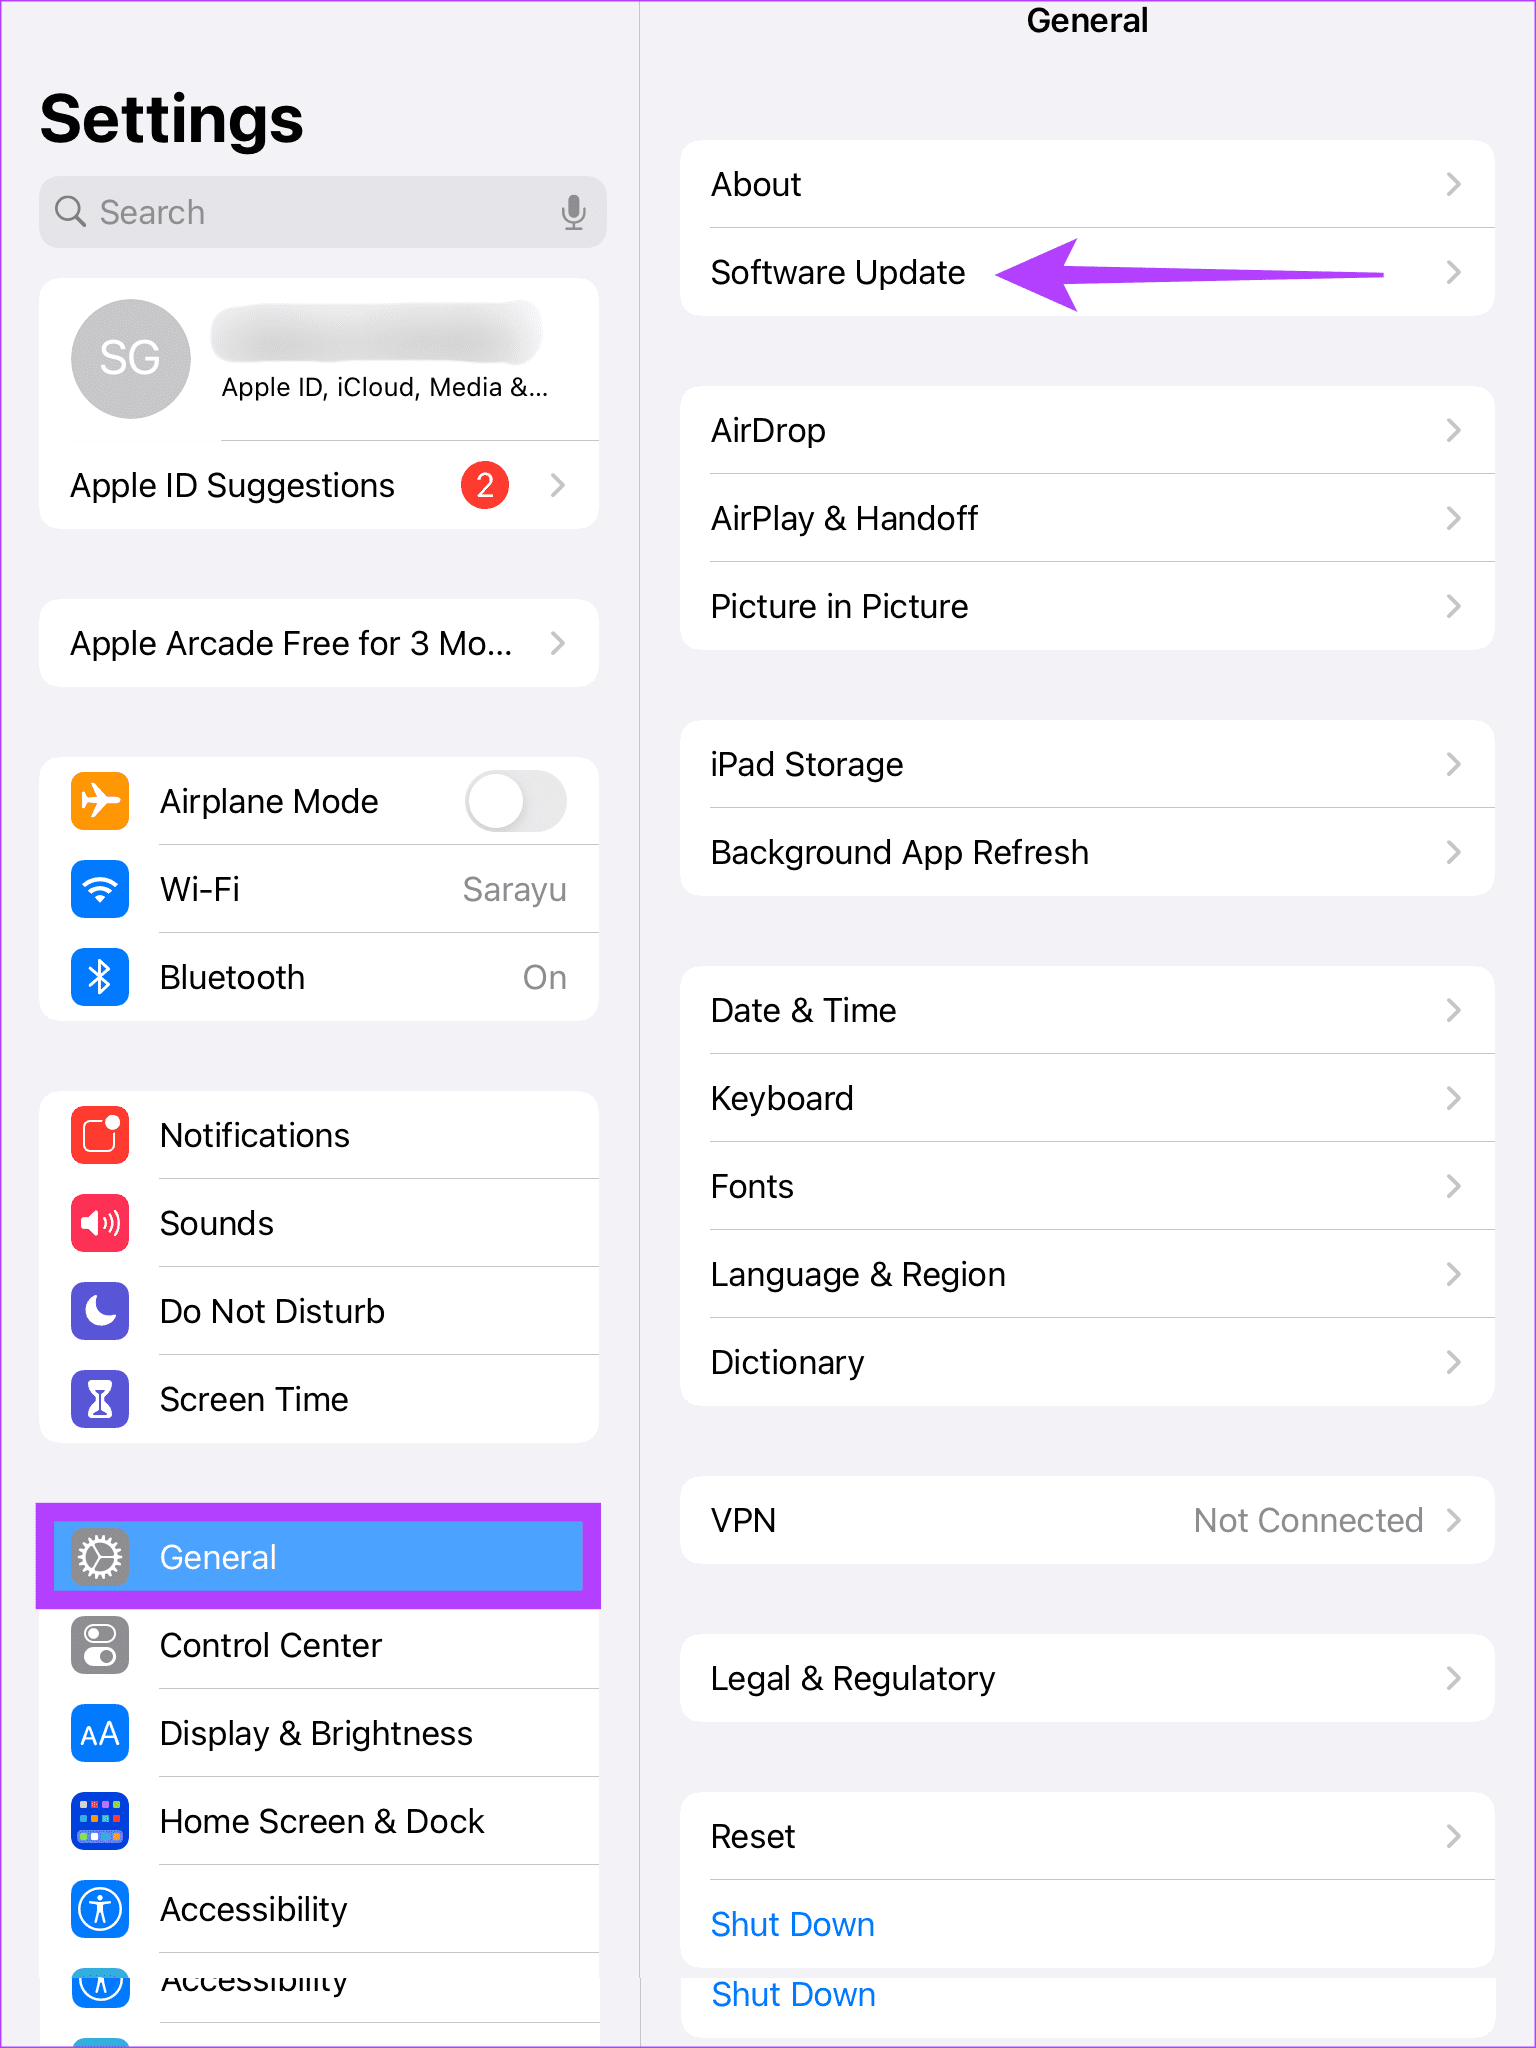 Go to settings, tap on General